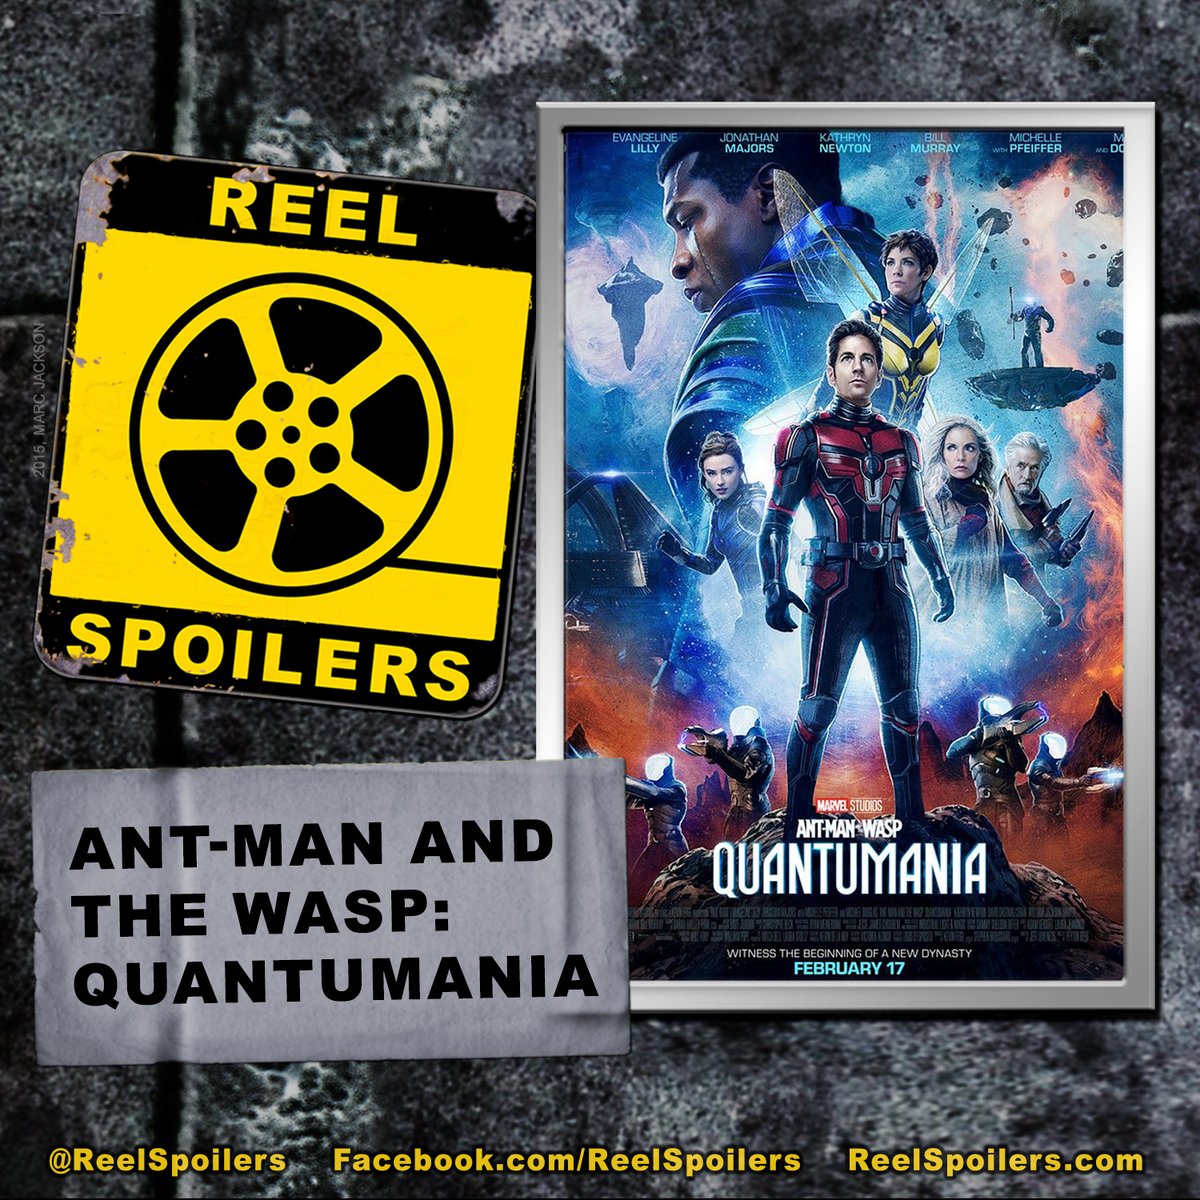 This week on @ReelSpoilers, we're diving into Phase 5 of the MCU with the help of @MattFBasler as we review #AntManAndTheWasp #Quantumania Have you seen it? #FilmTwitter #Marvel #Comics LISTEN: patreon.com/posts/ant-man-… Subscribe and watch on YouTube: youtube.com/watch?v=HEGHH7…